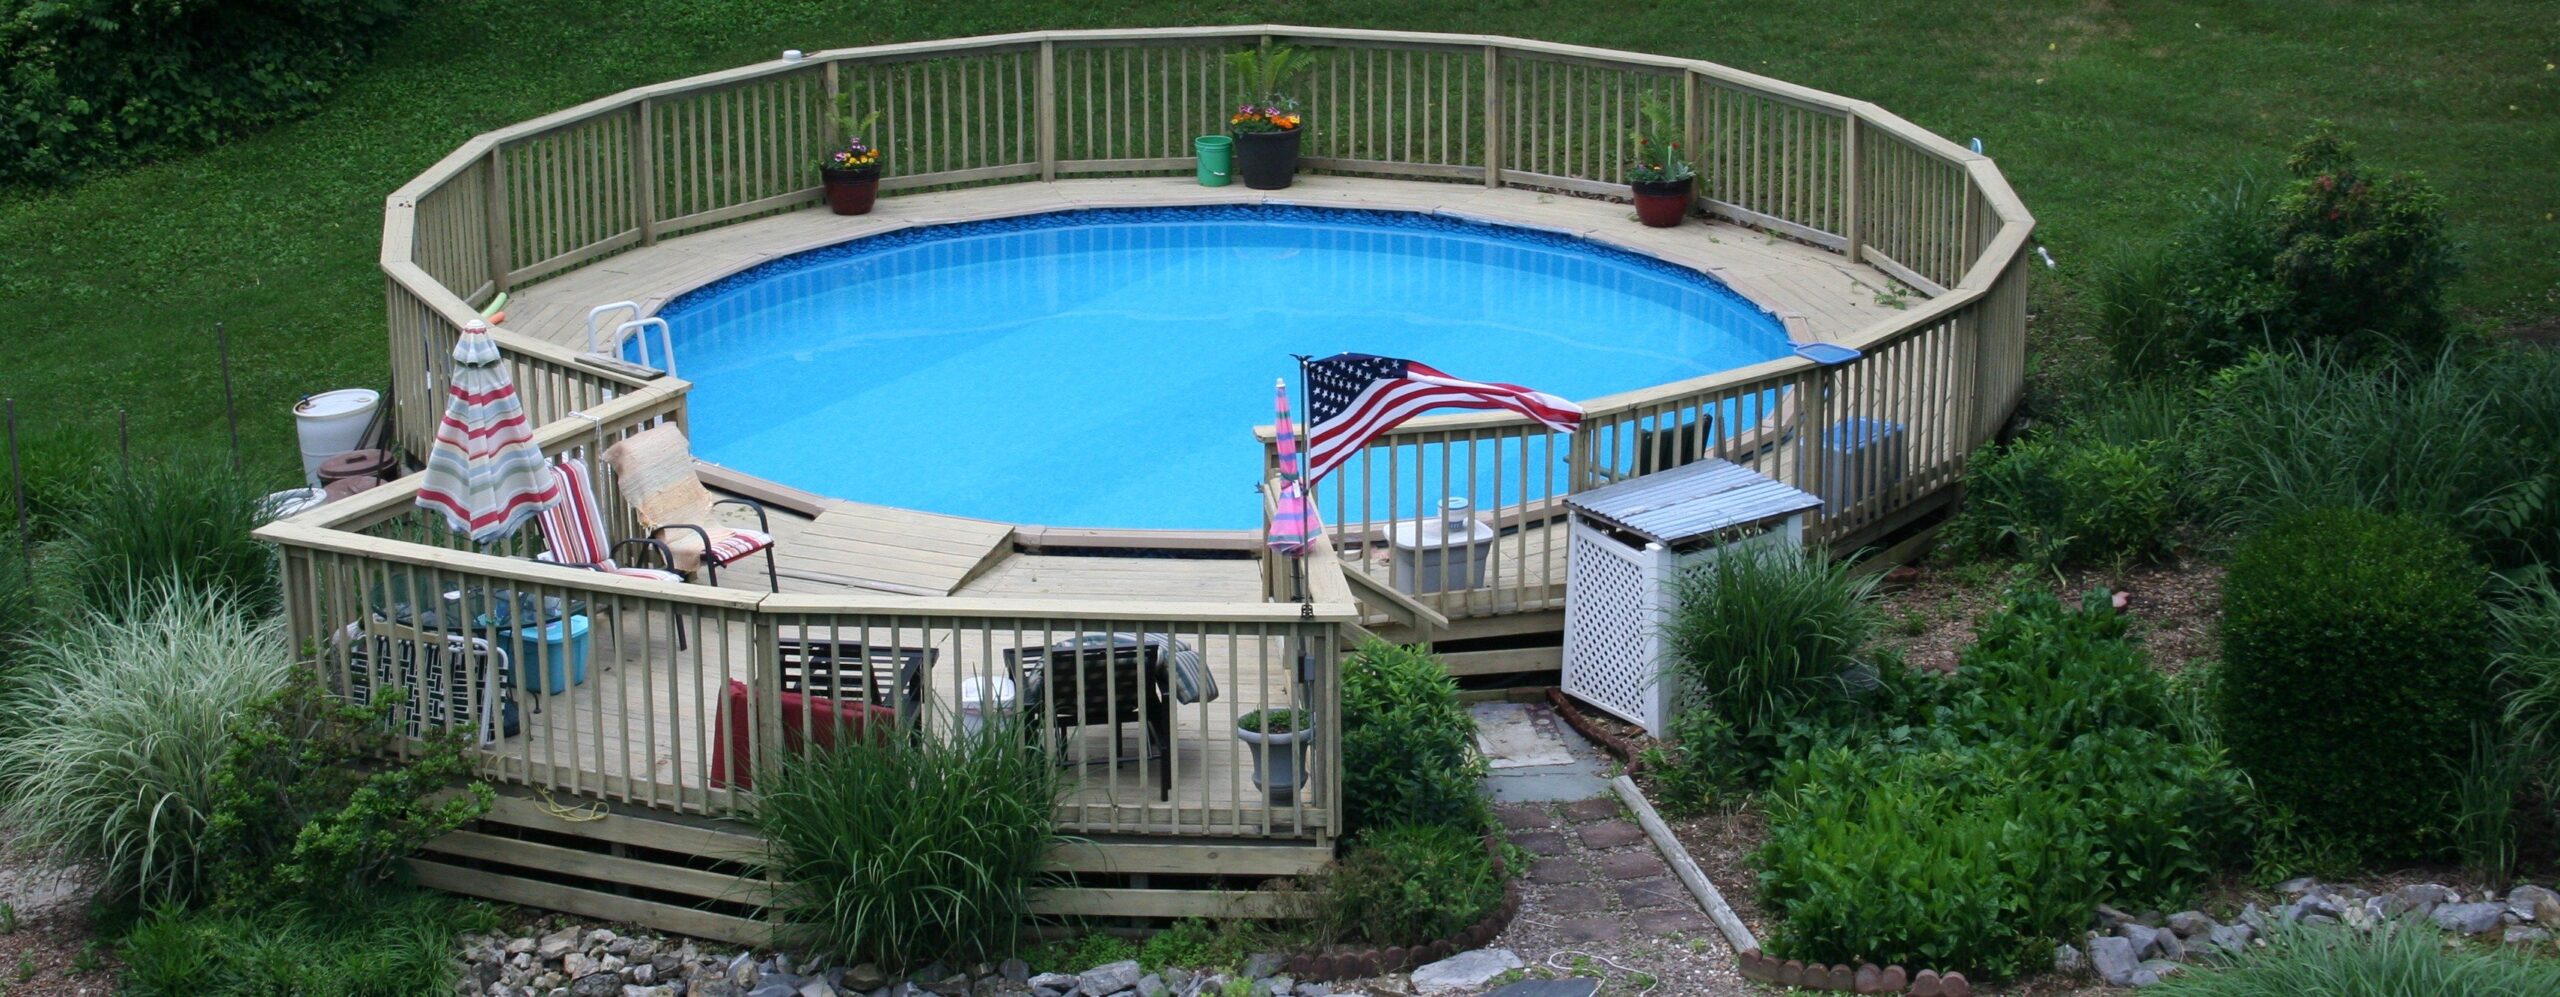 Pros And Cons Of Saltwater Systems For Above Ground Pools